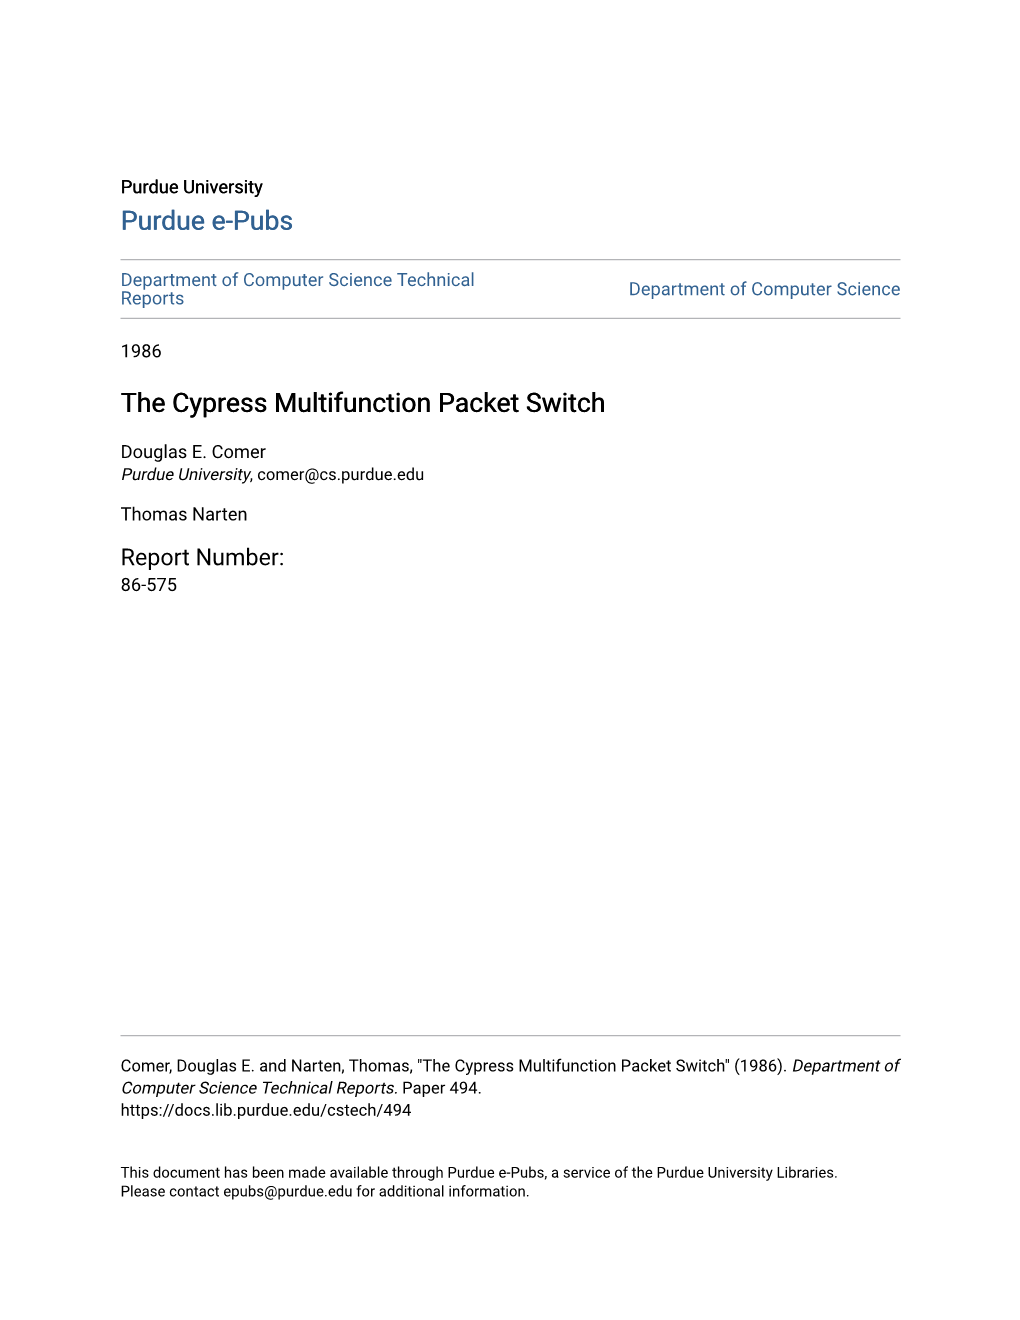 The Cypress Multifunction Packet Switch